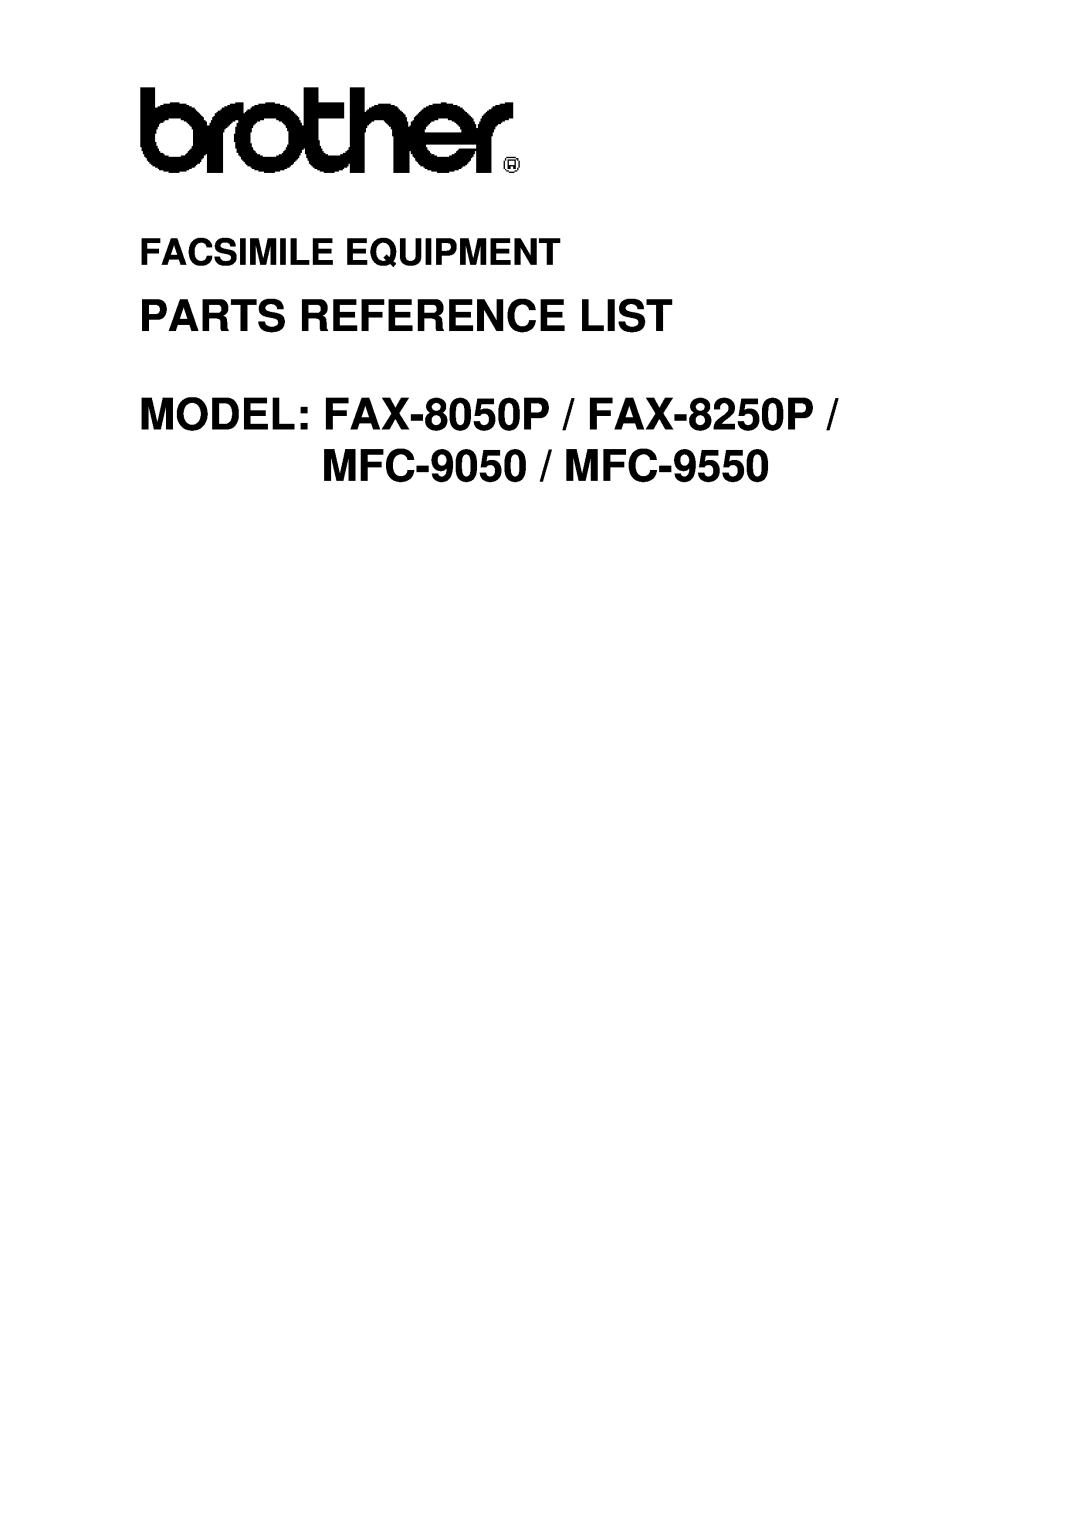 Brother manual Parts Reference List, MODEL FAX-8050P / FAX-8250P / MFC-9050 / MFC-9550, Facsimile Equipment 